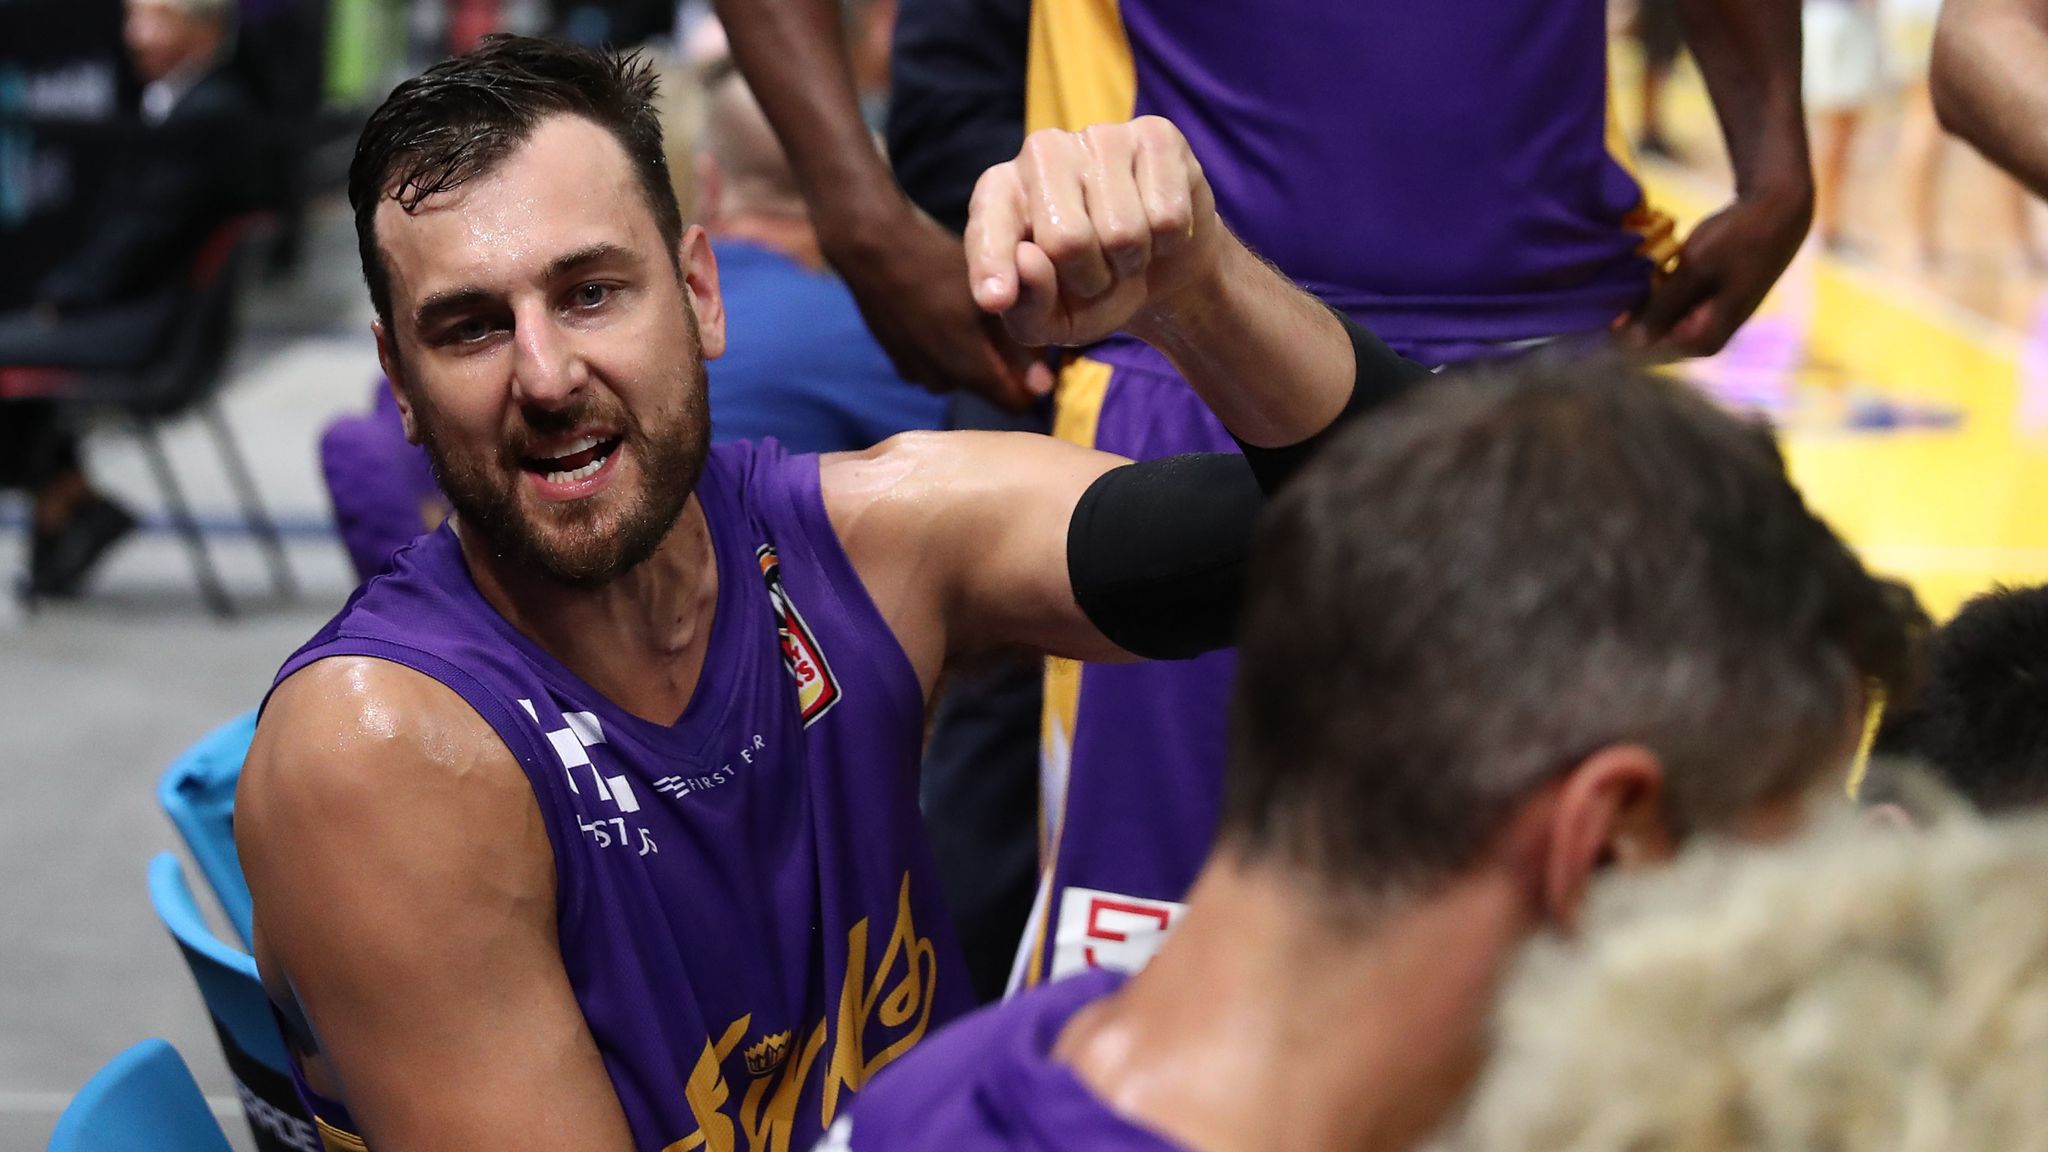 NBA news: Andrew Bogut Golden State Warriors return, what role will he play